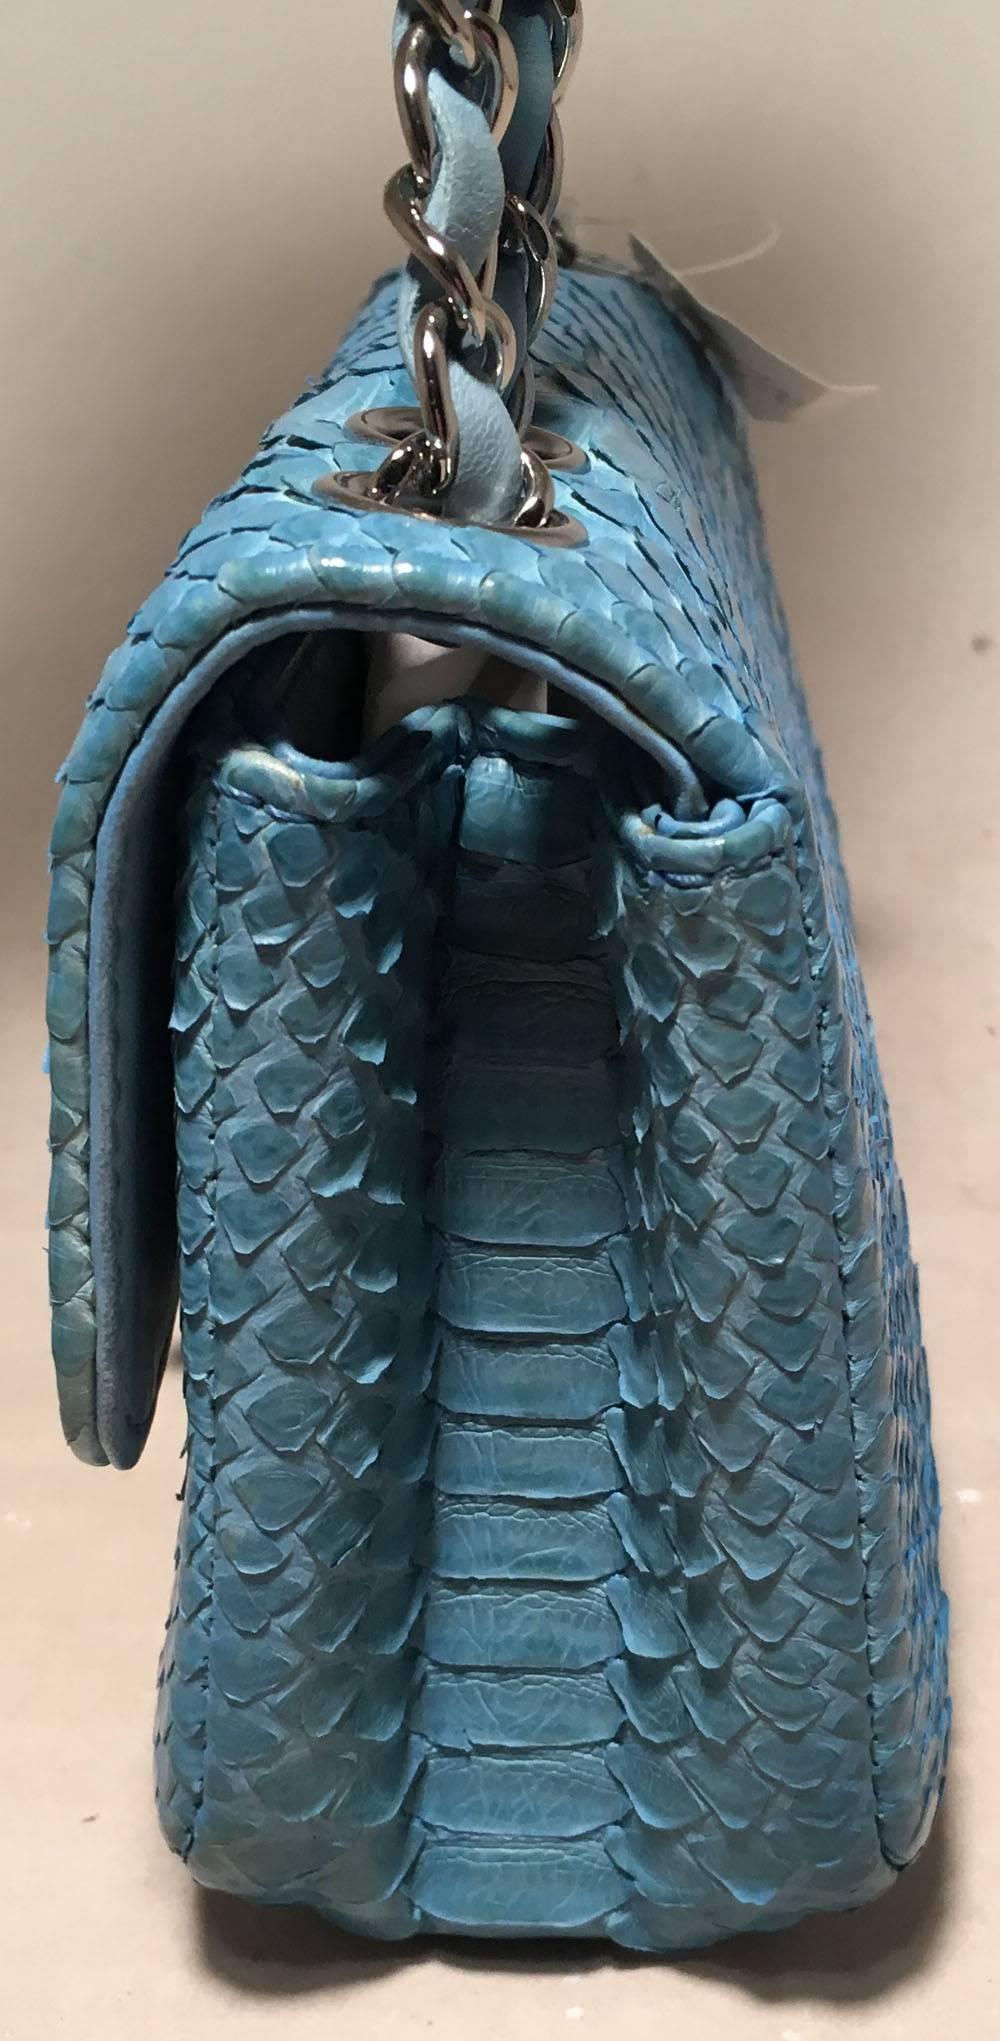 Chanel Blue Snakeskin Python Mini Classic Flap Shoulder Bag in excellent condition.  Blue snakeskin exterior trimmed with silver hardware and signature woven chain and leather shoulder strap.  Front CC Logo twist closure opens via single flap to a